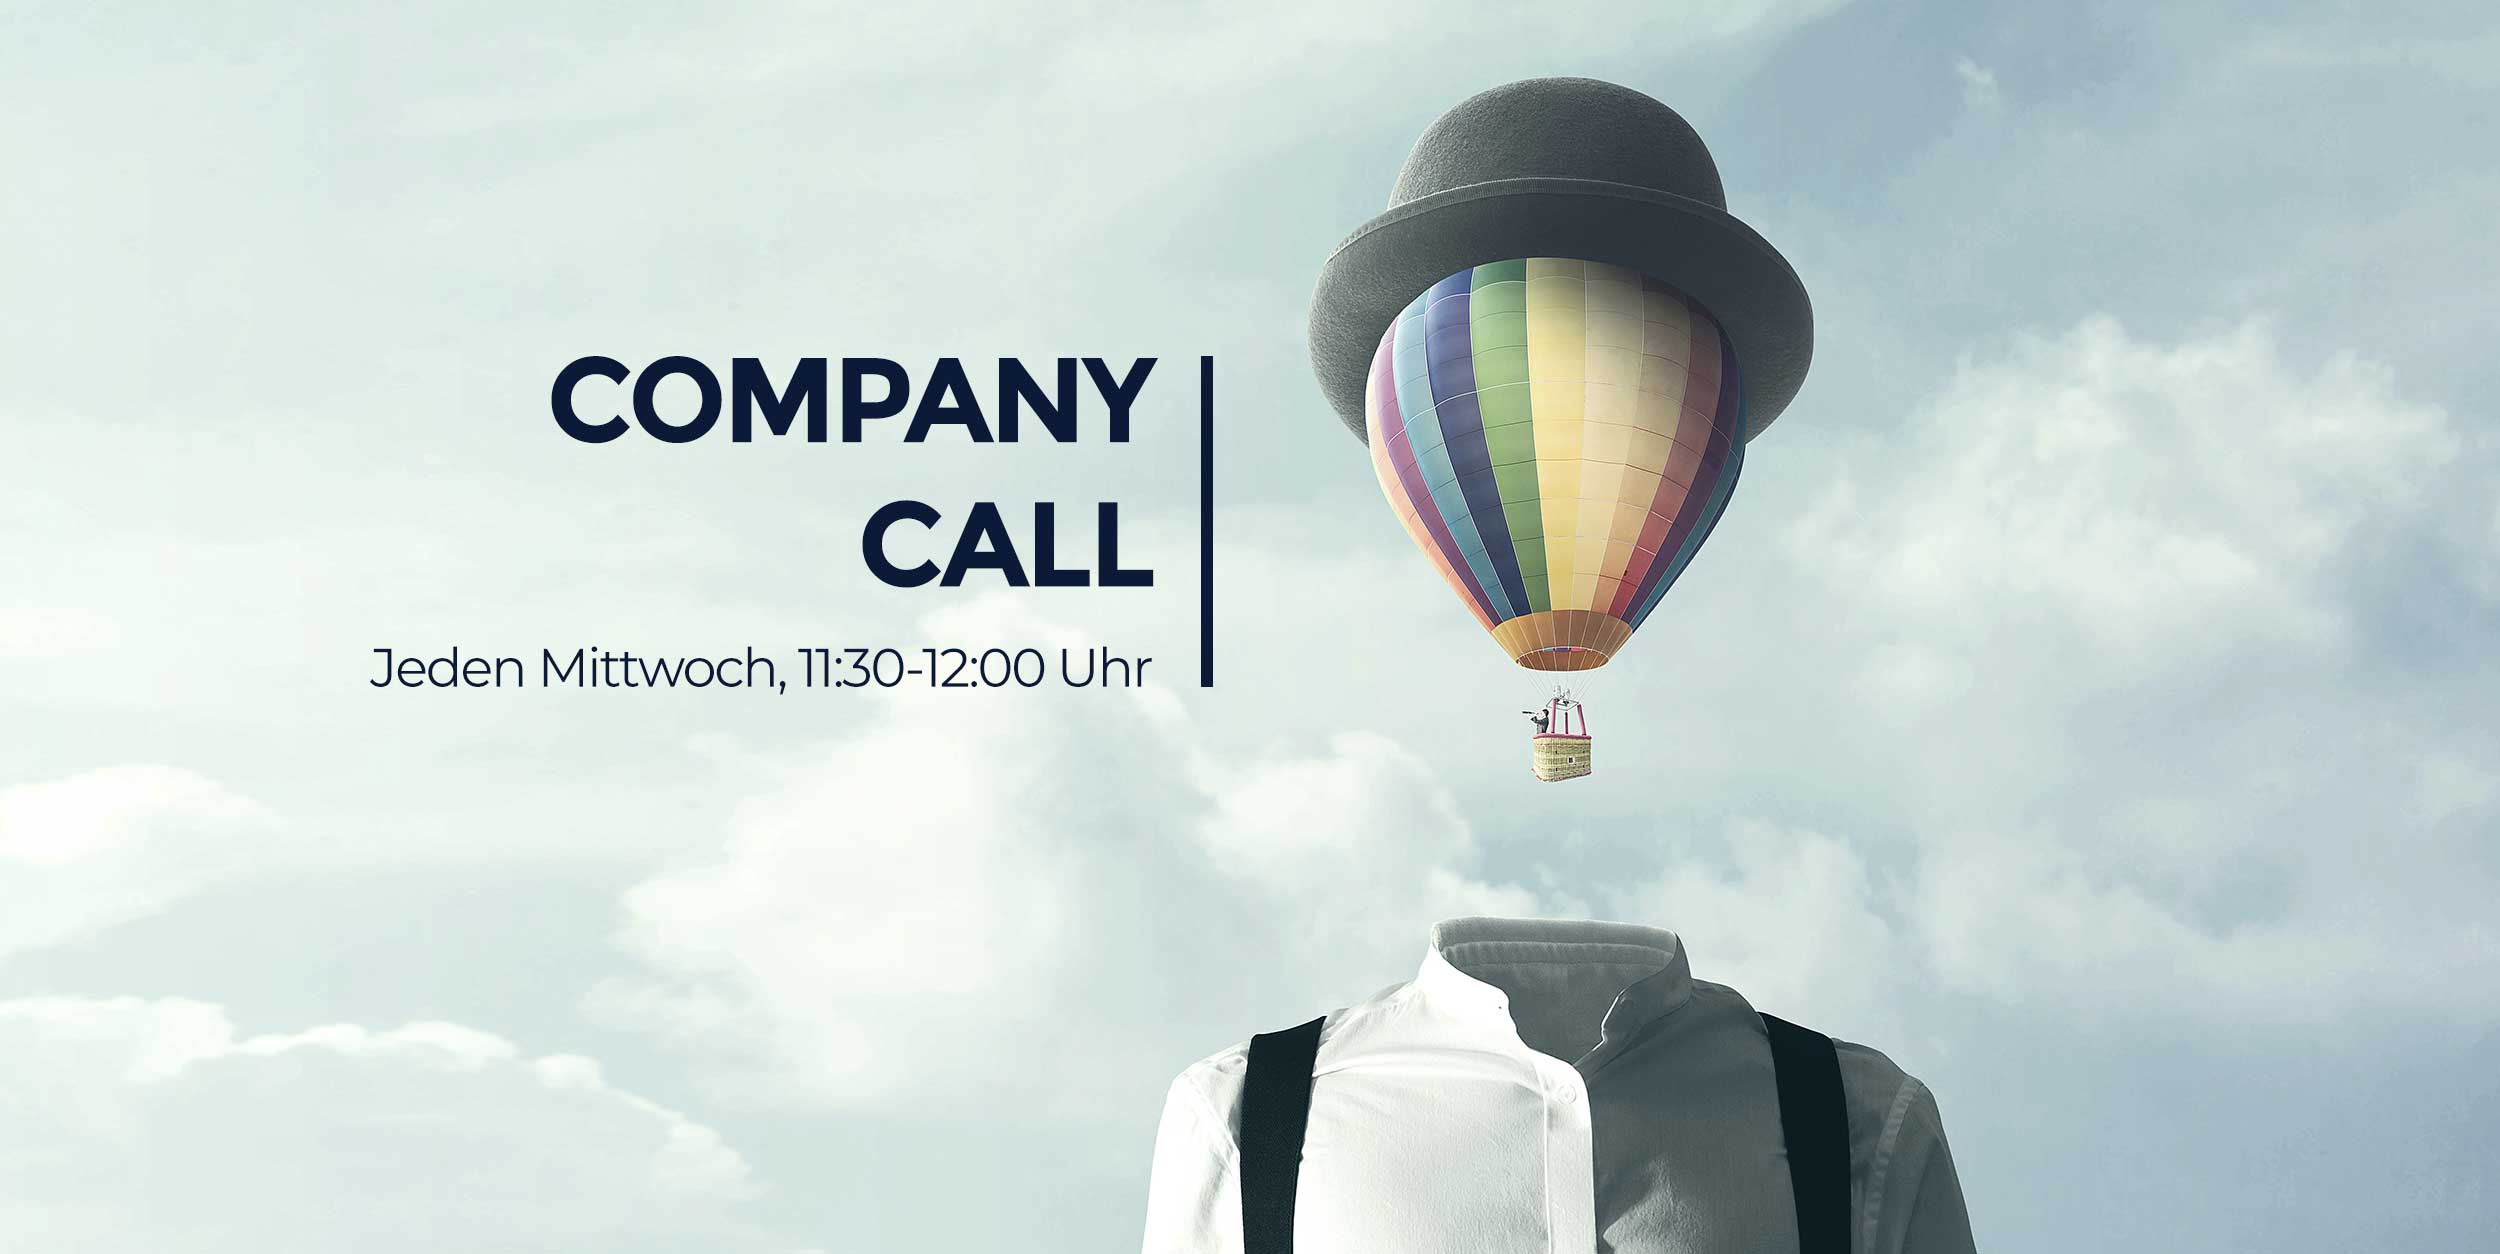 Weekly Company Call, mittwochs 11:30 bis 12:00 Uhr